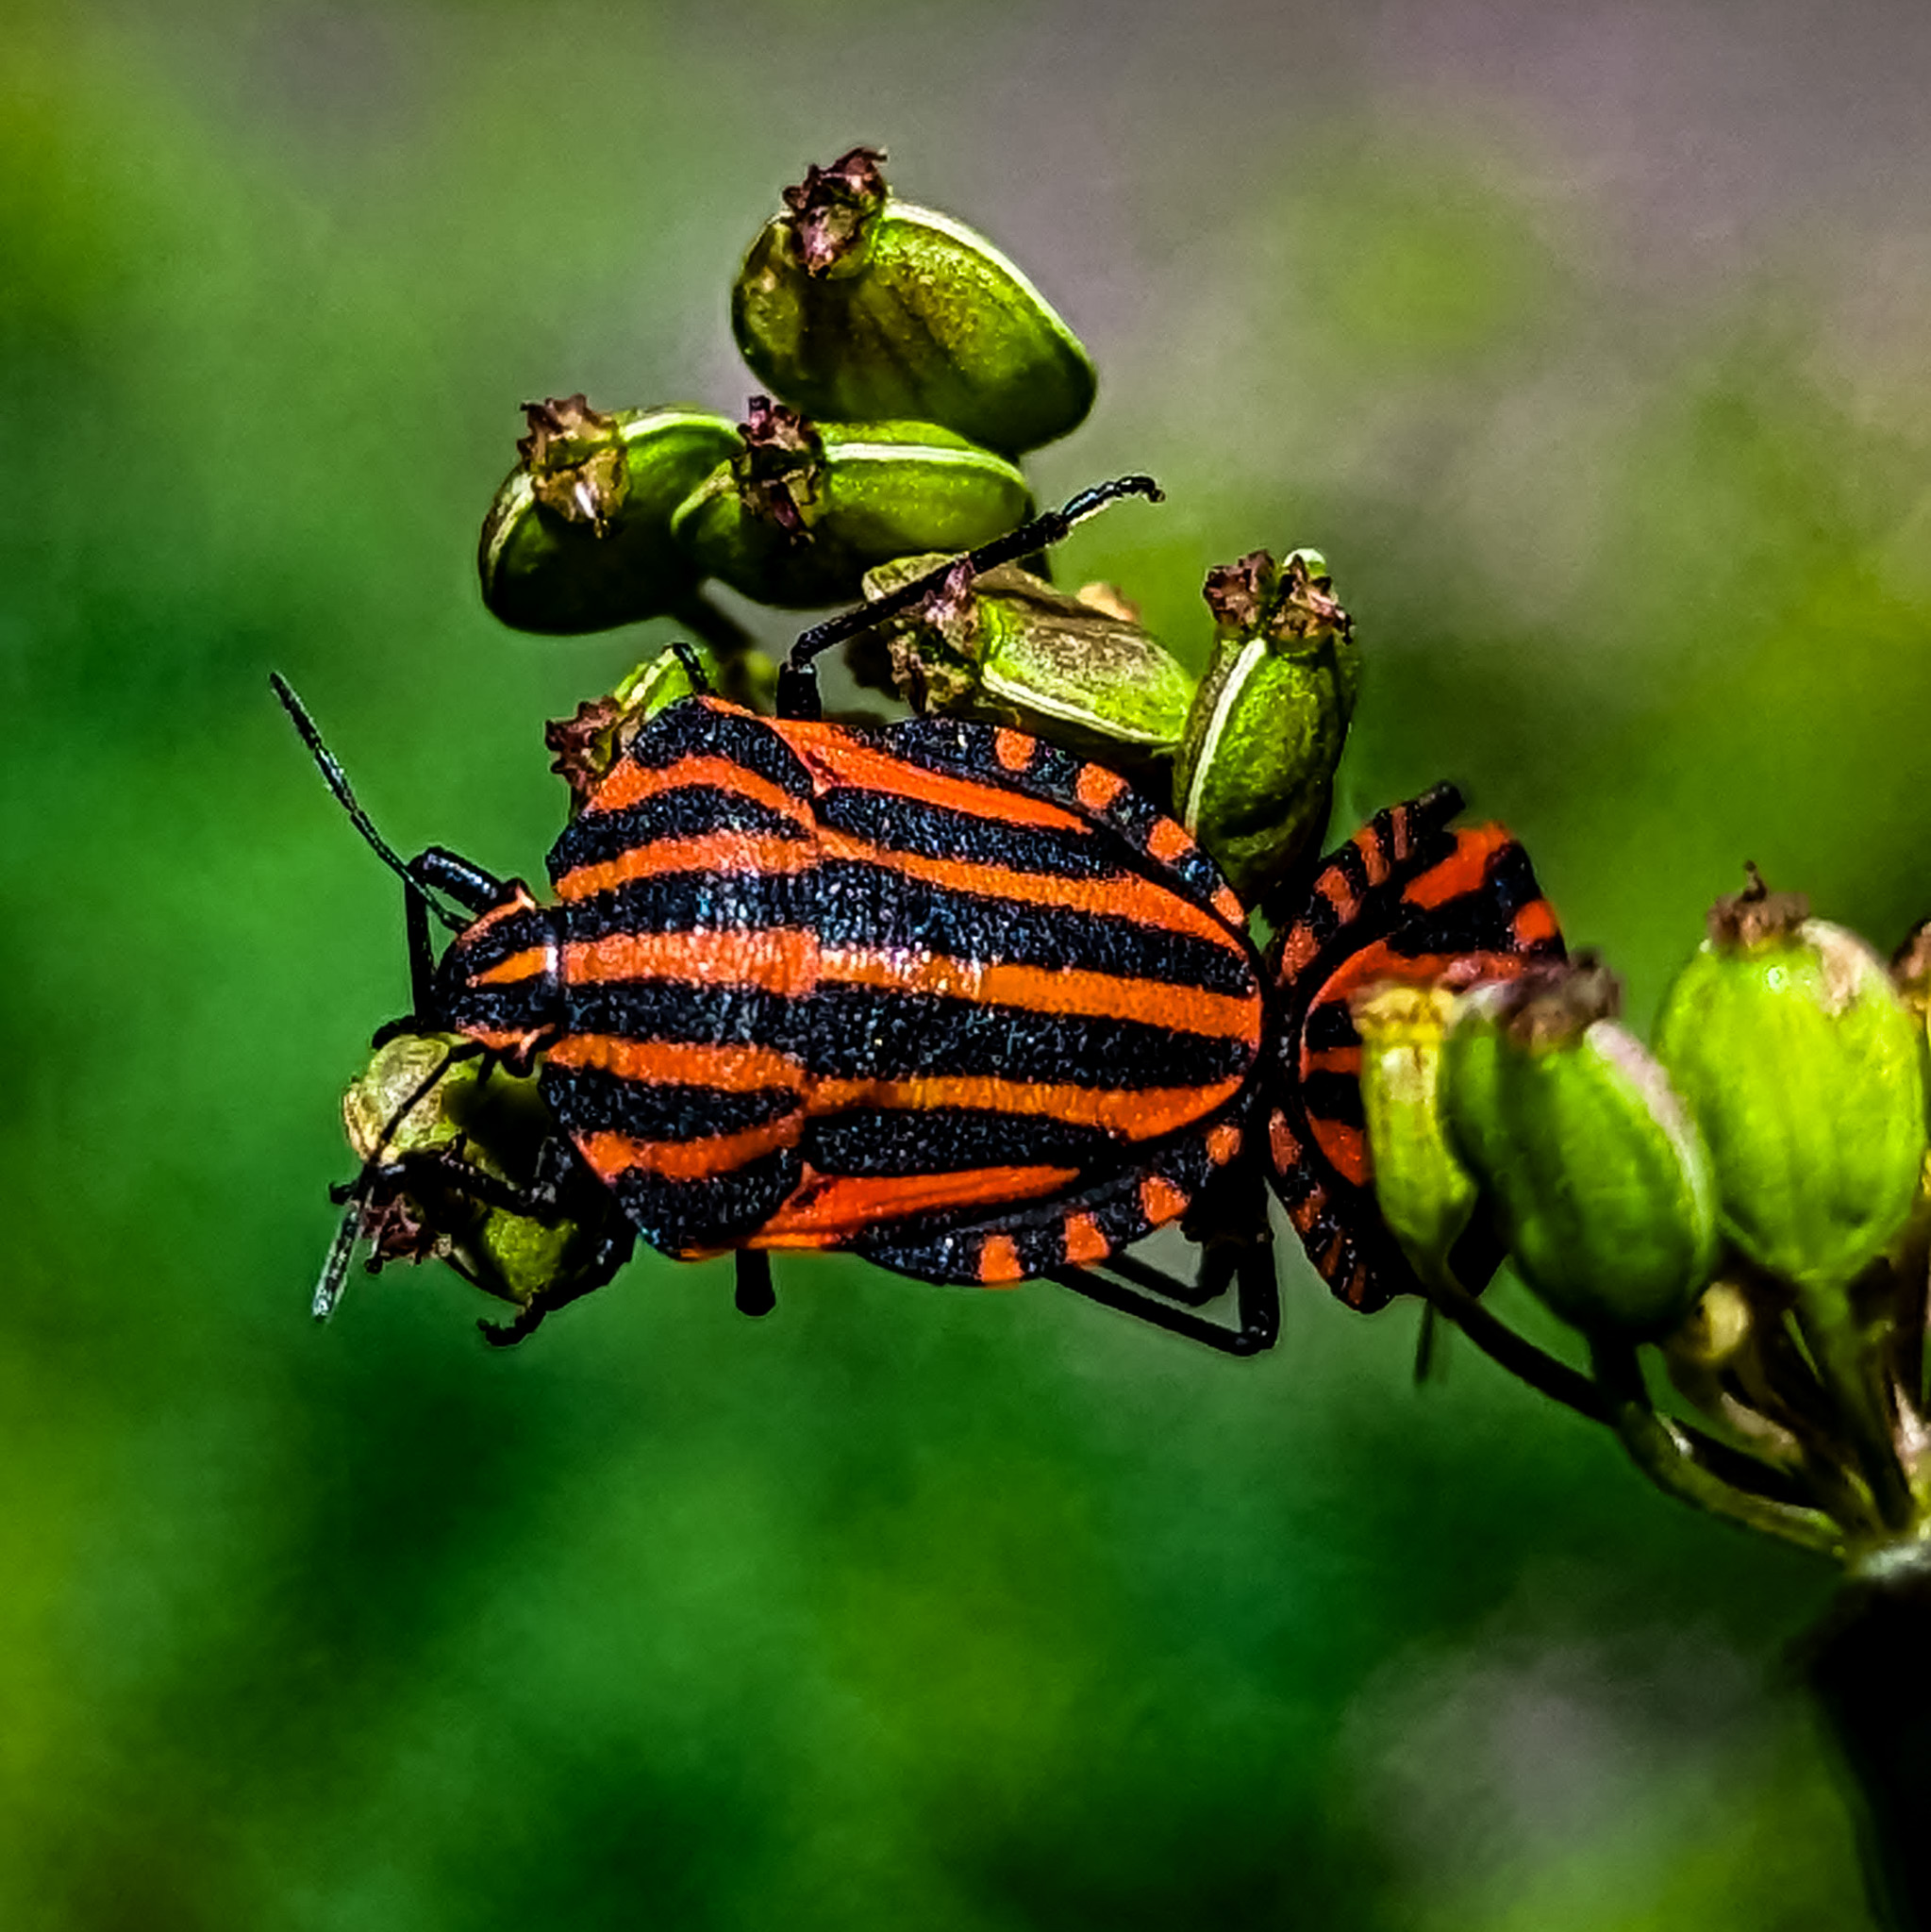 Minstrel bug. Graphosoma italicum is a species of shield bug in the family Pentatomidae.